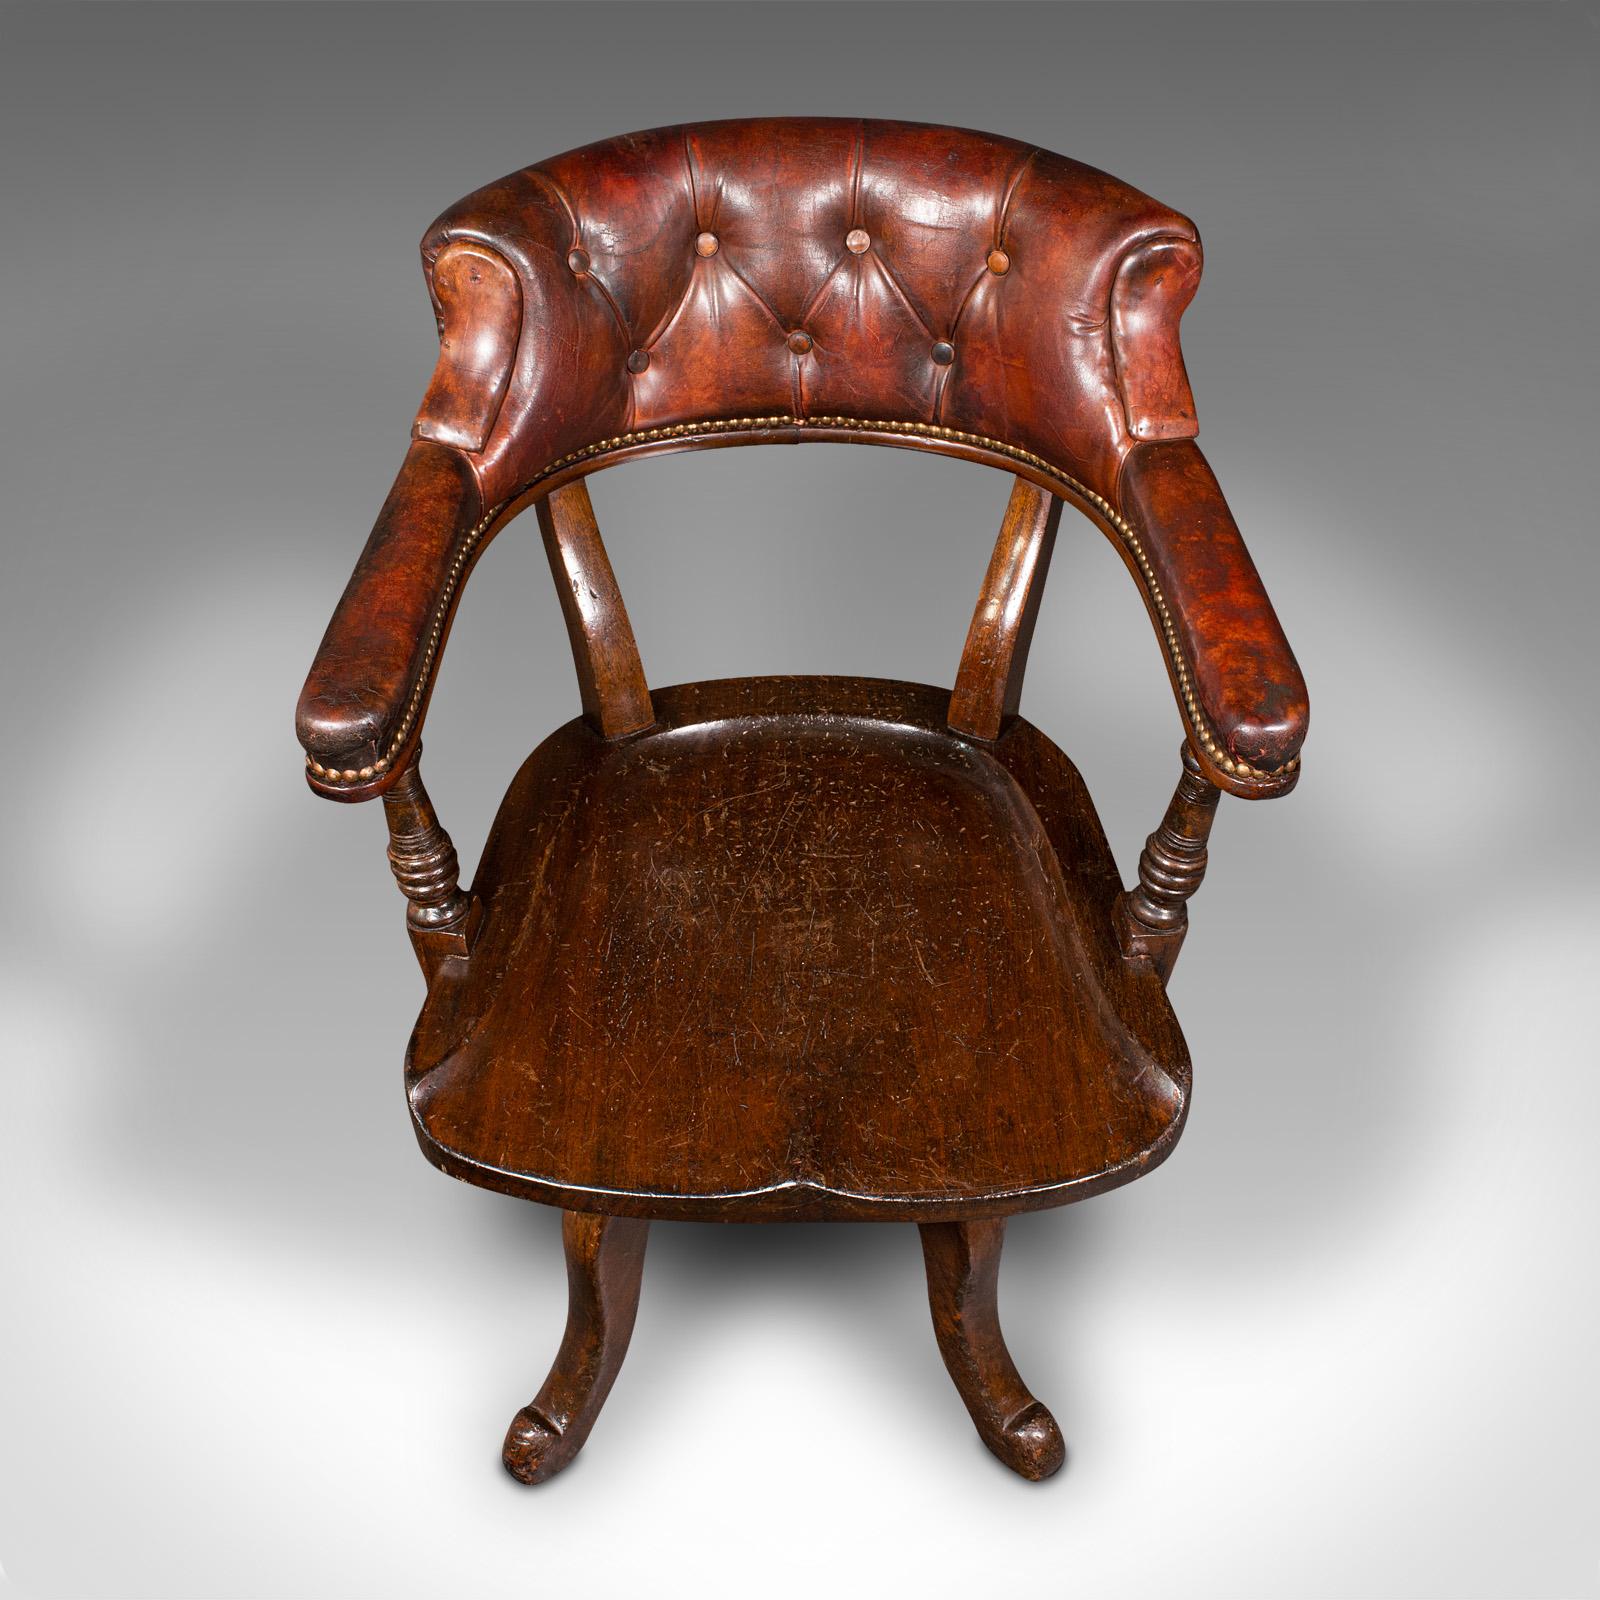 Antique Porter's Hall Chair, English, Leather, Rotary Desk Seat, Victorian, 1880 For Sale 2